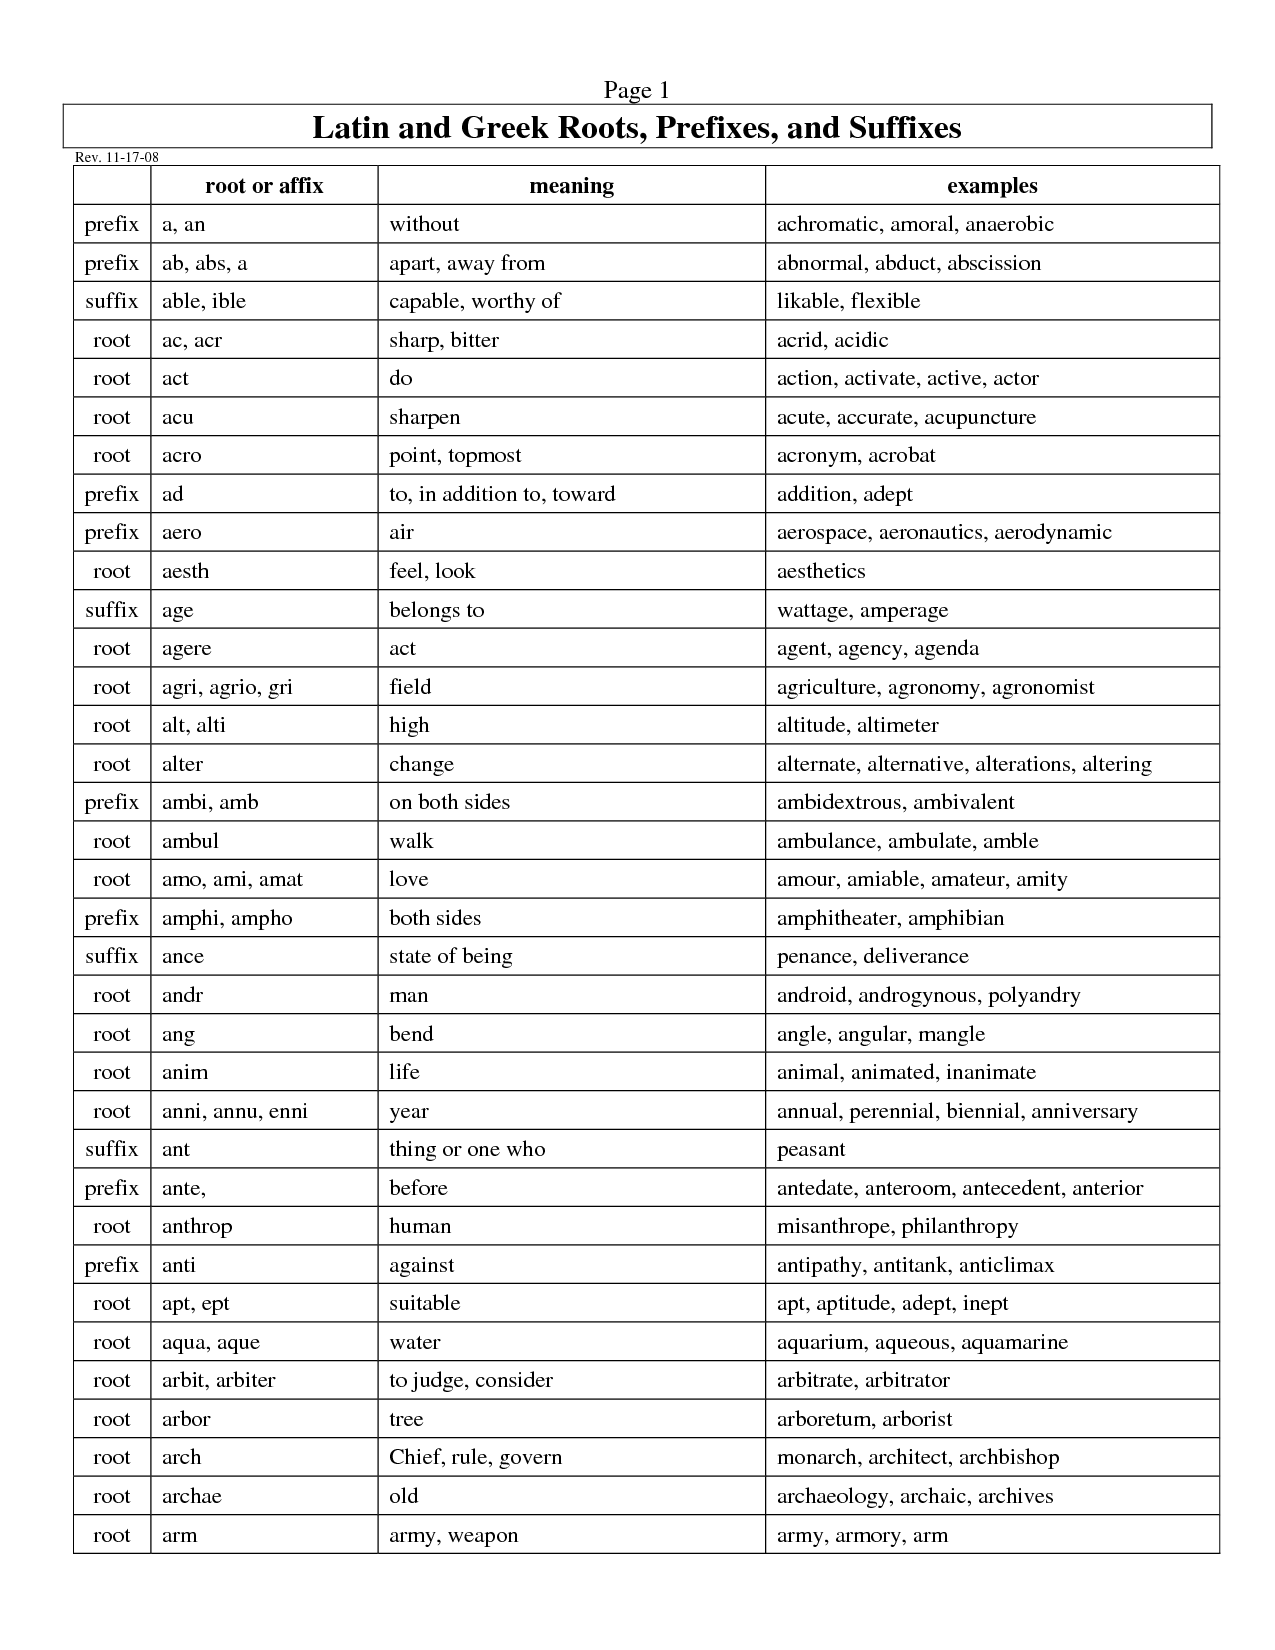 13-best-images-of-prefix-suffix-worksheets-root-words-prefix-and-suffix-worksheets-science